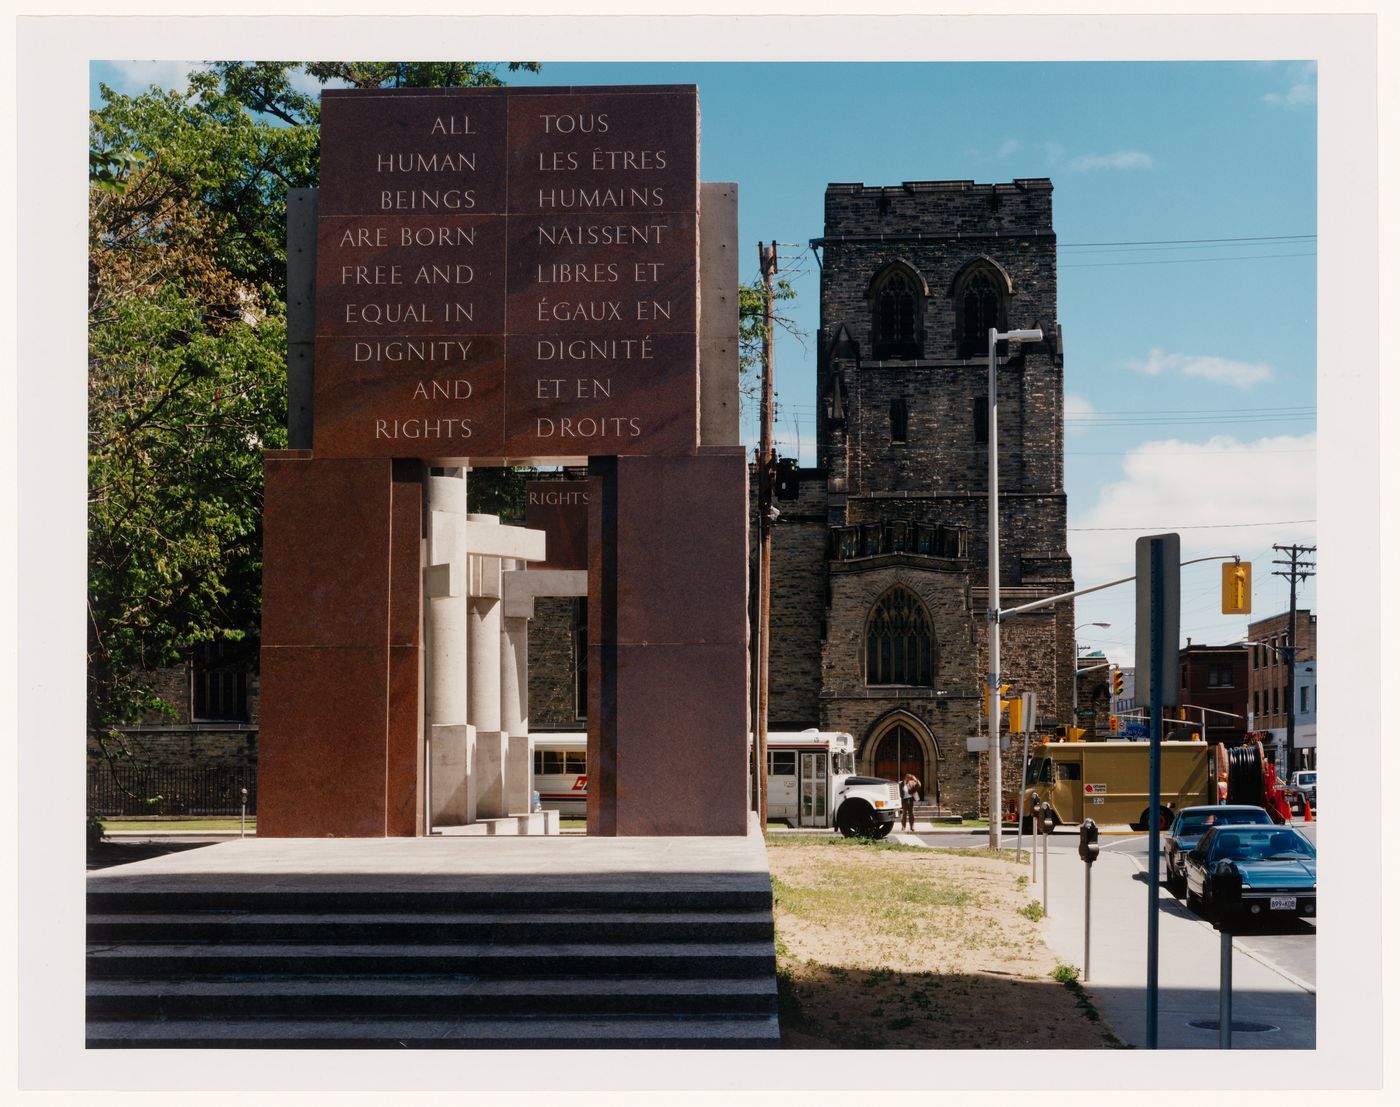 View of The Canadian Tribute to Human Rights with text in image, Ottawa, Ontario